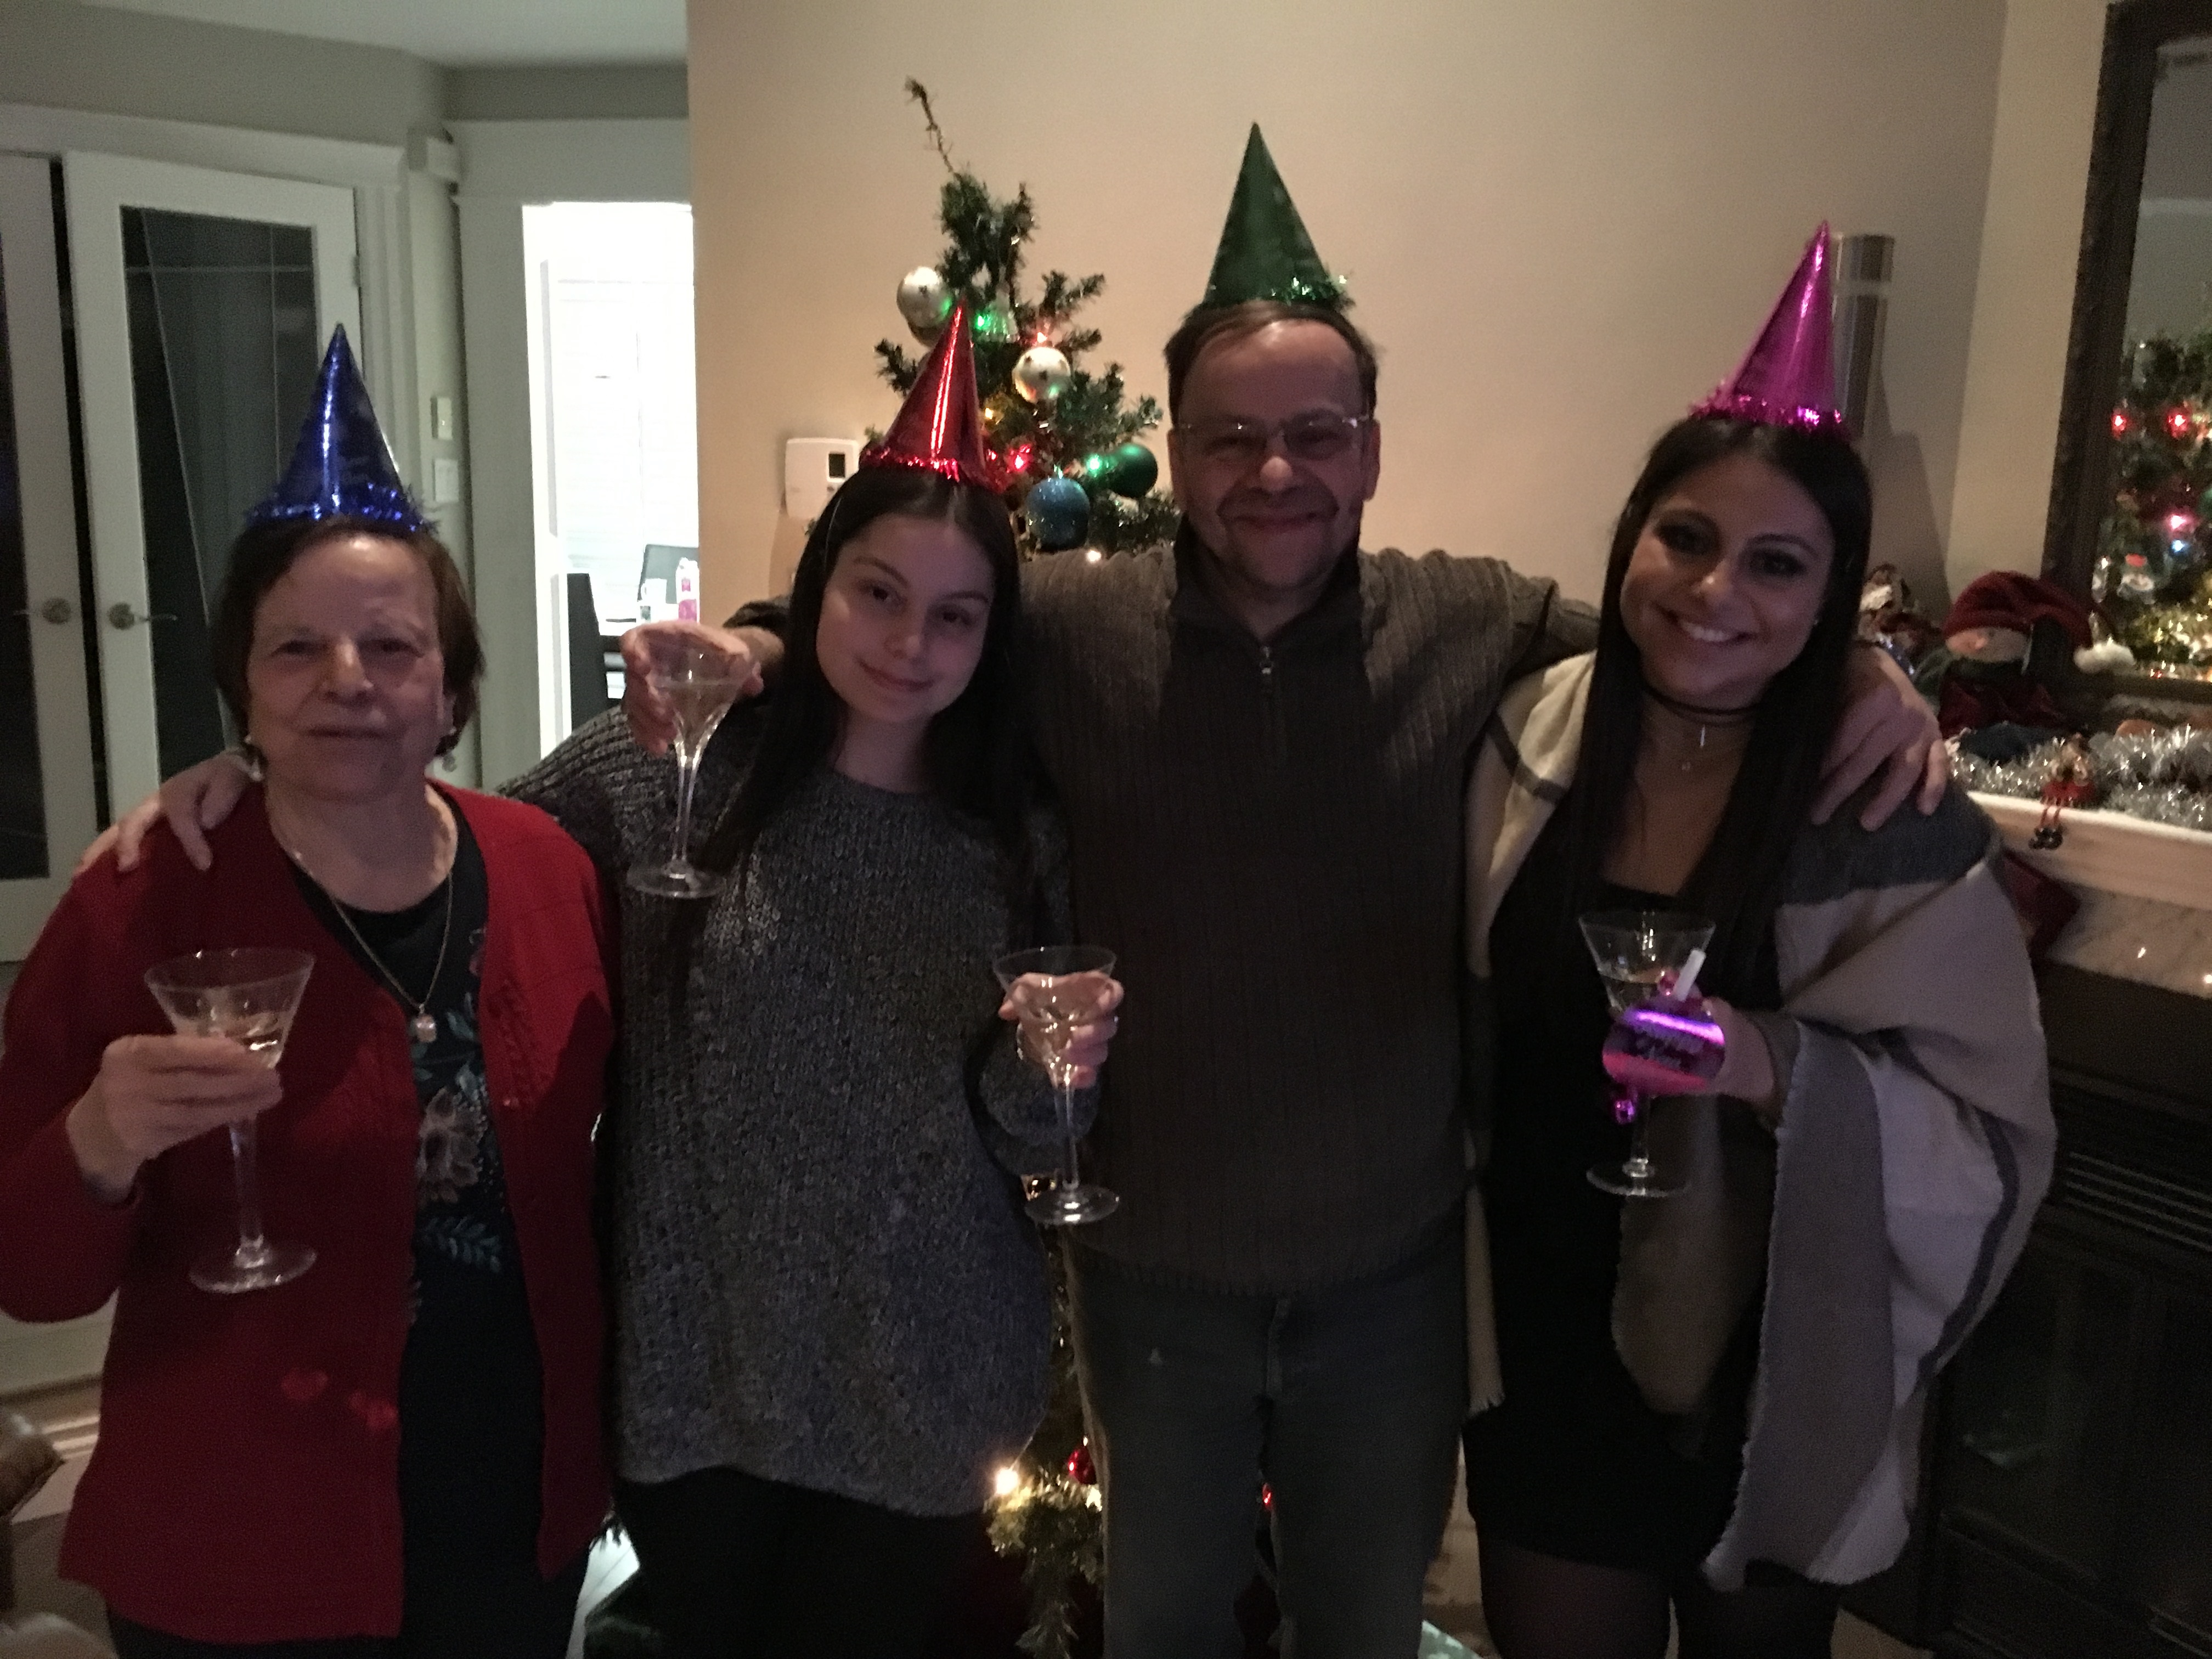 photograph of my grandmother, father, sister and I celebrating the New Year of 2017